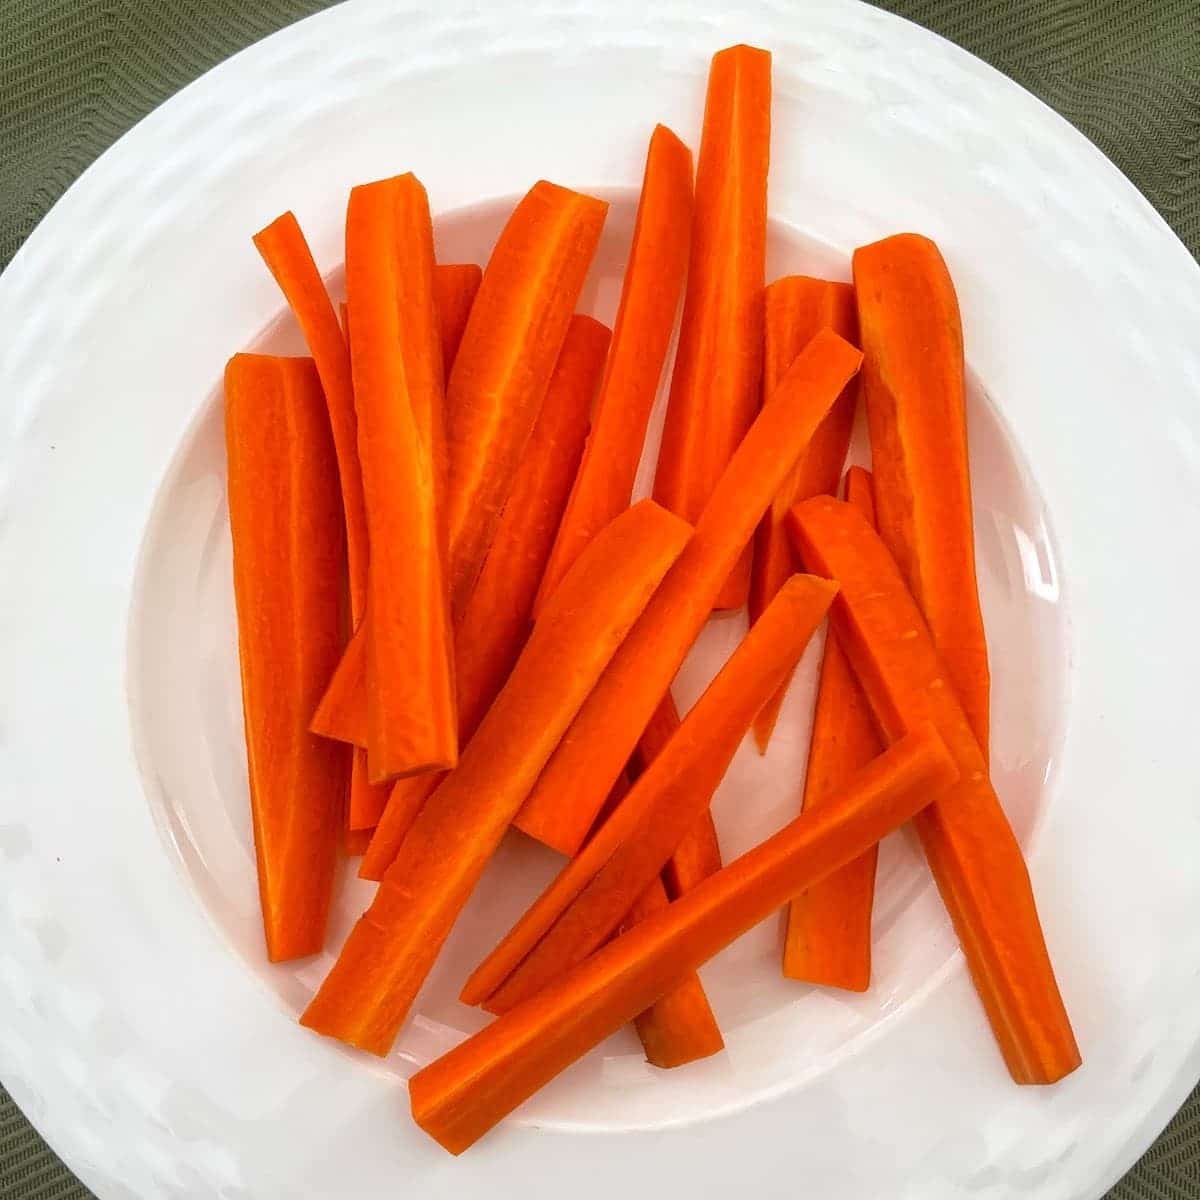 Sliced carrots on a white plate.